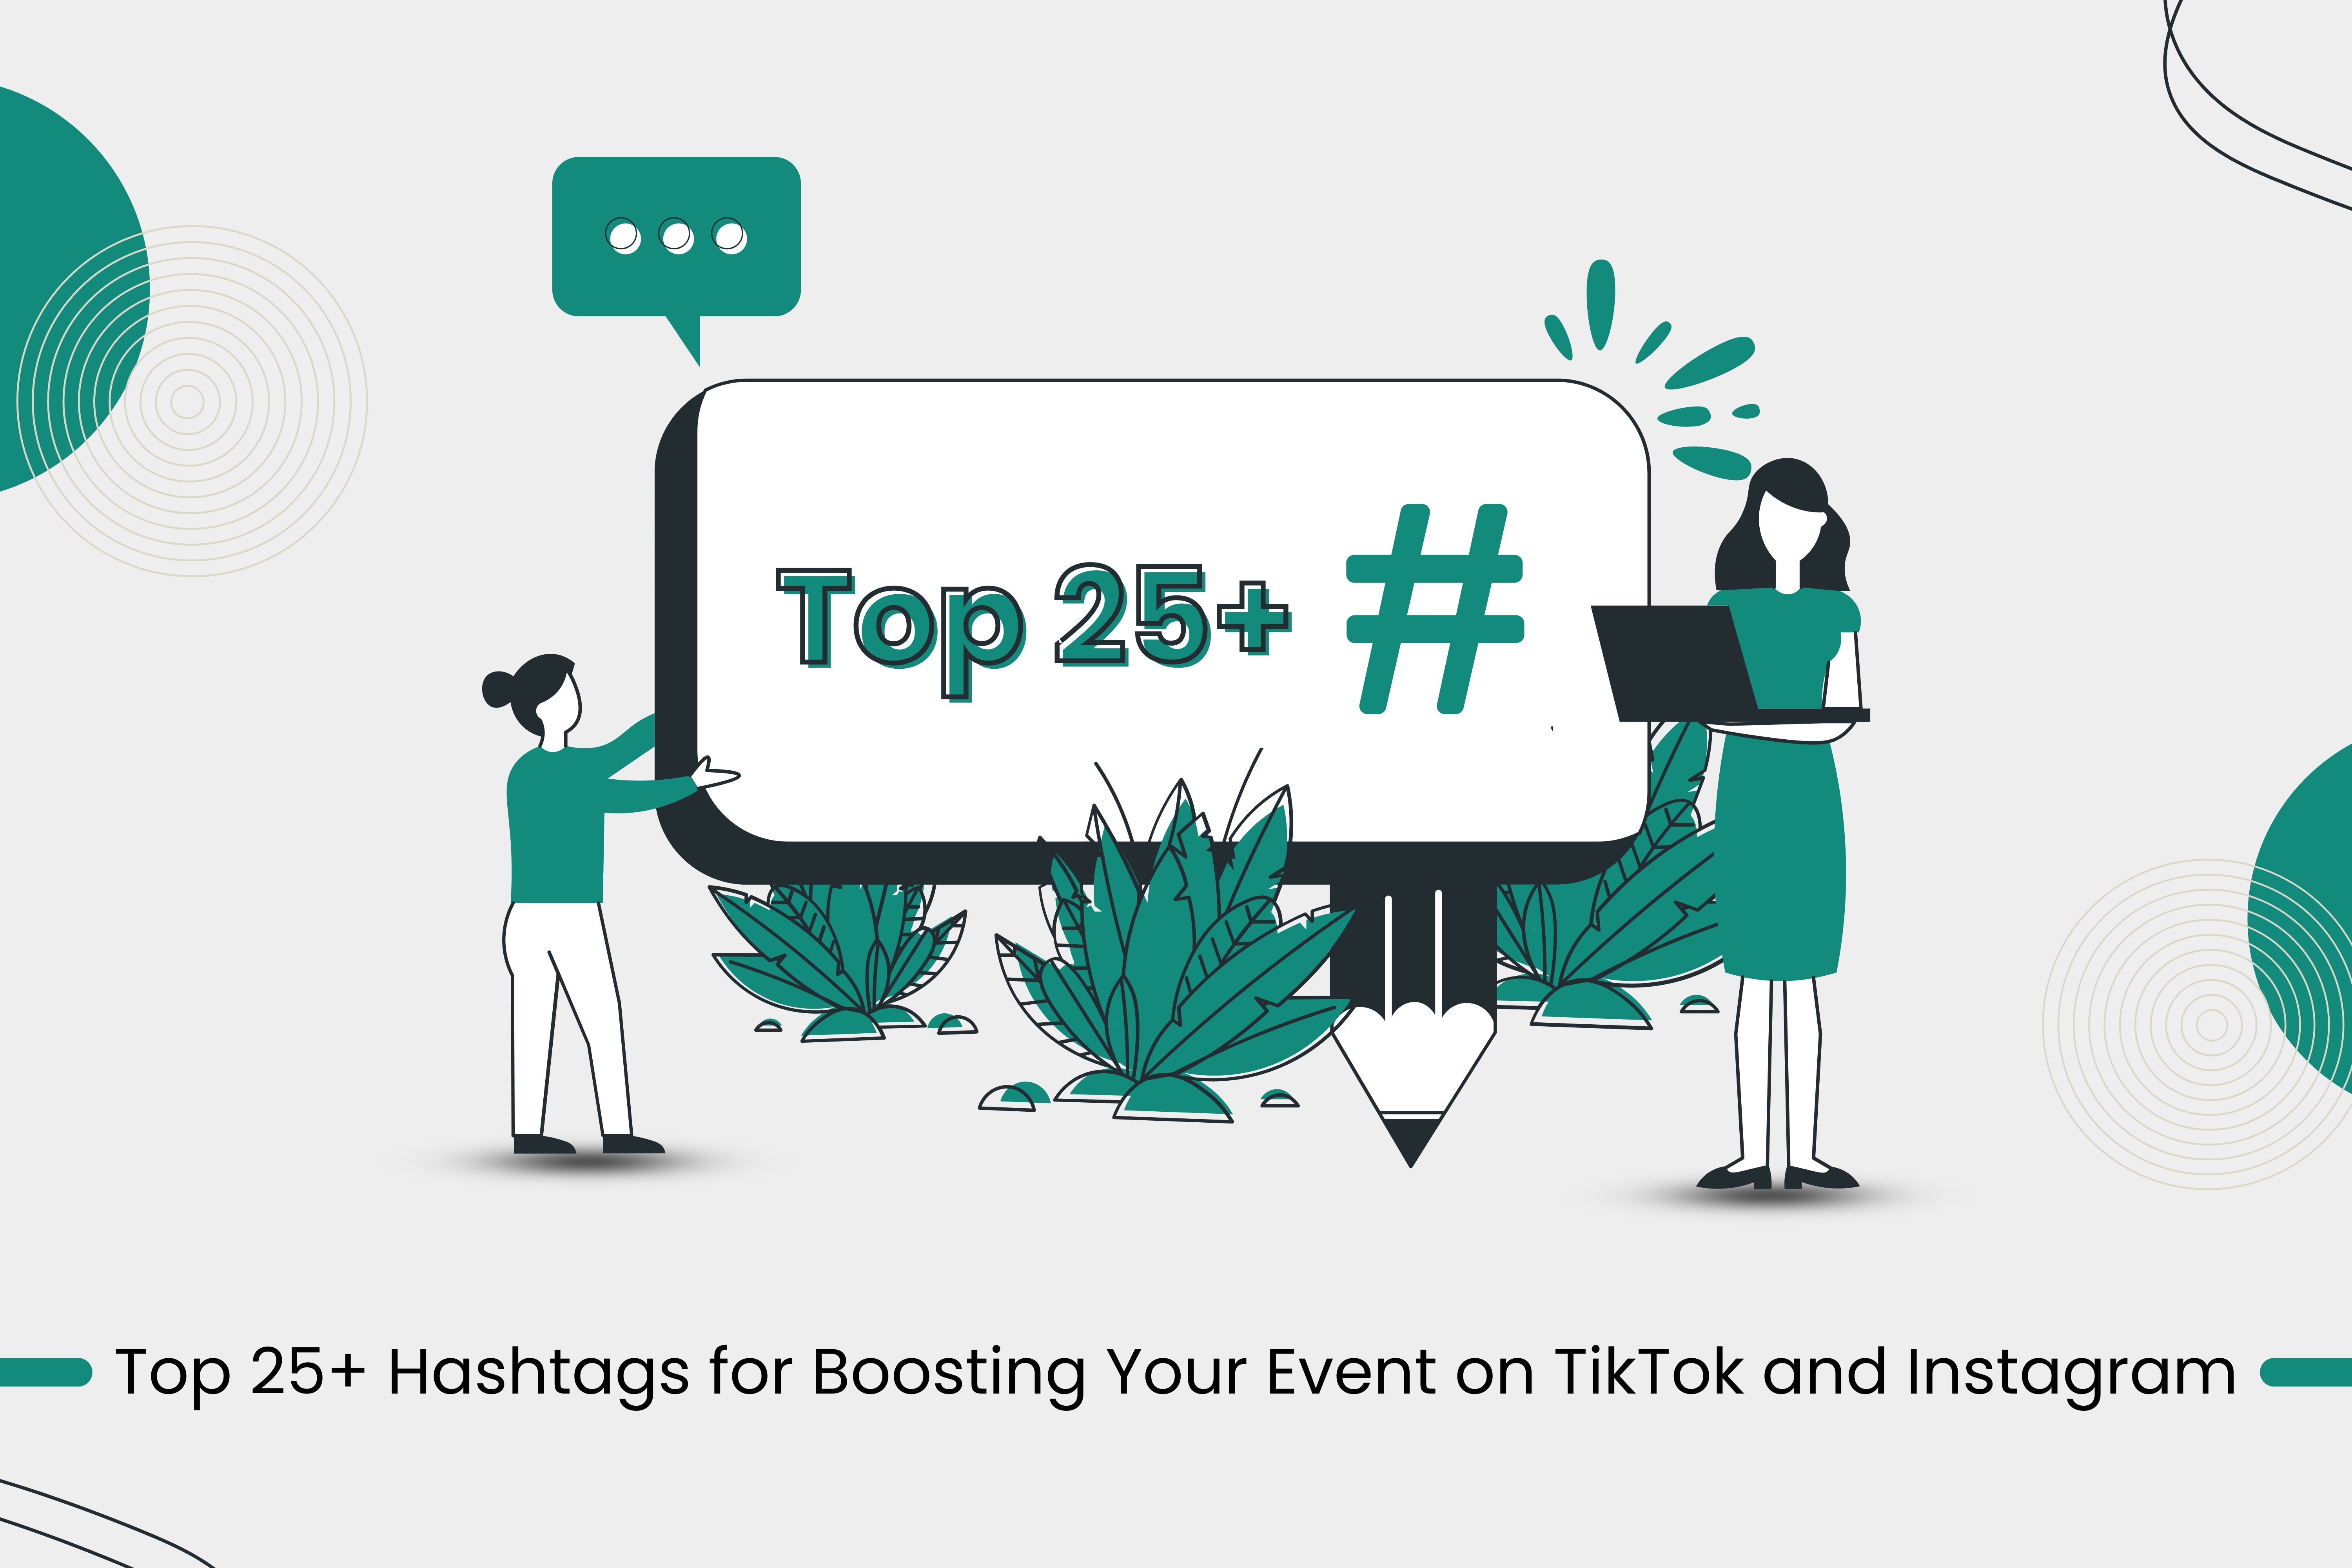 Hashtags for Boosting Your Event